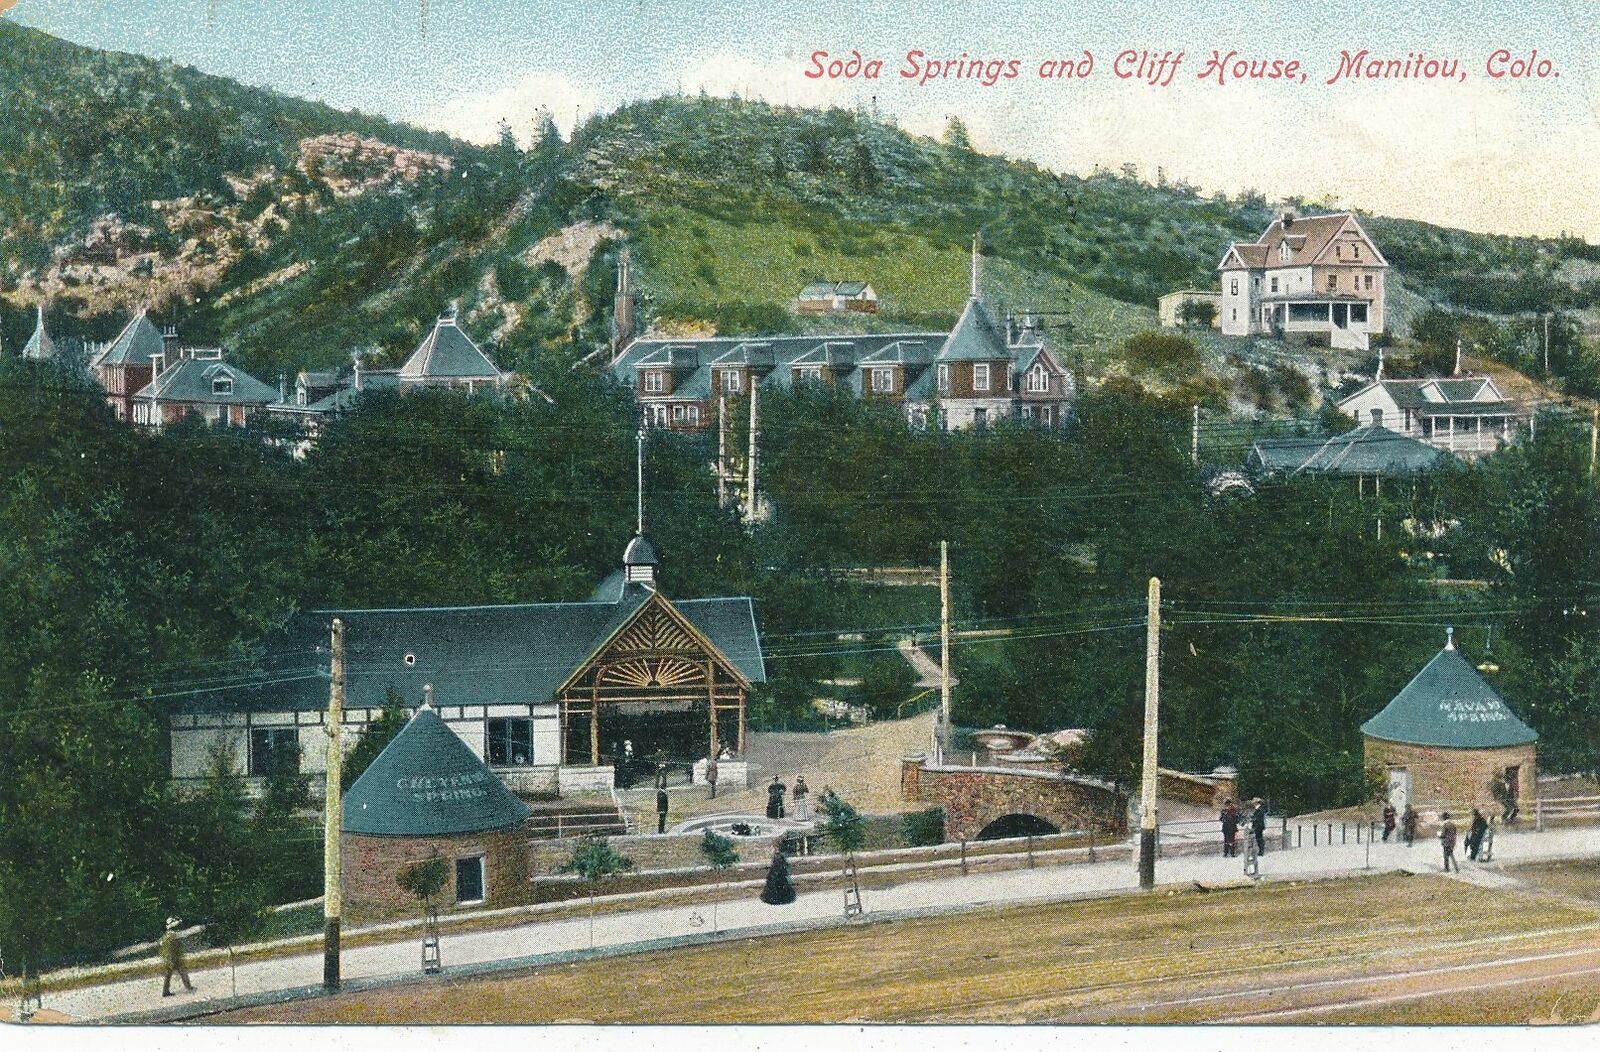 MANITOU CO - Soda Springs and Cliff House - 1909